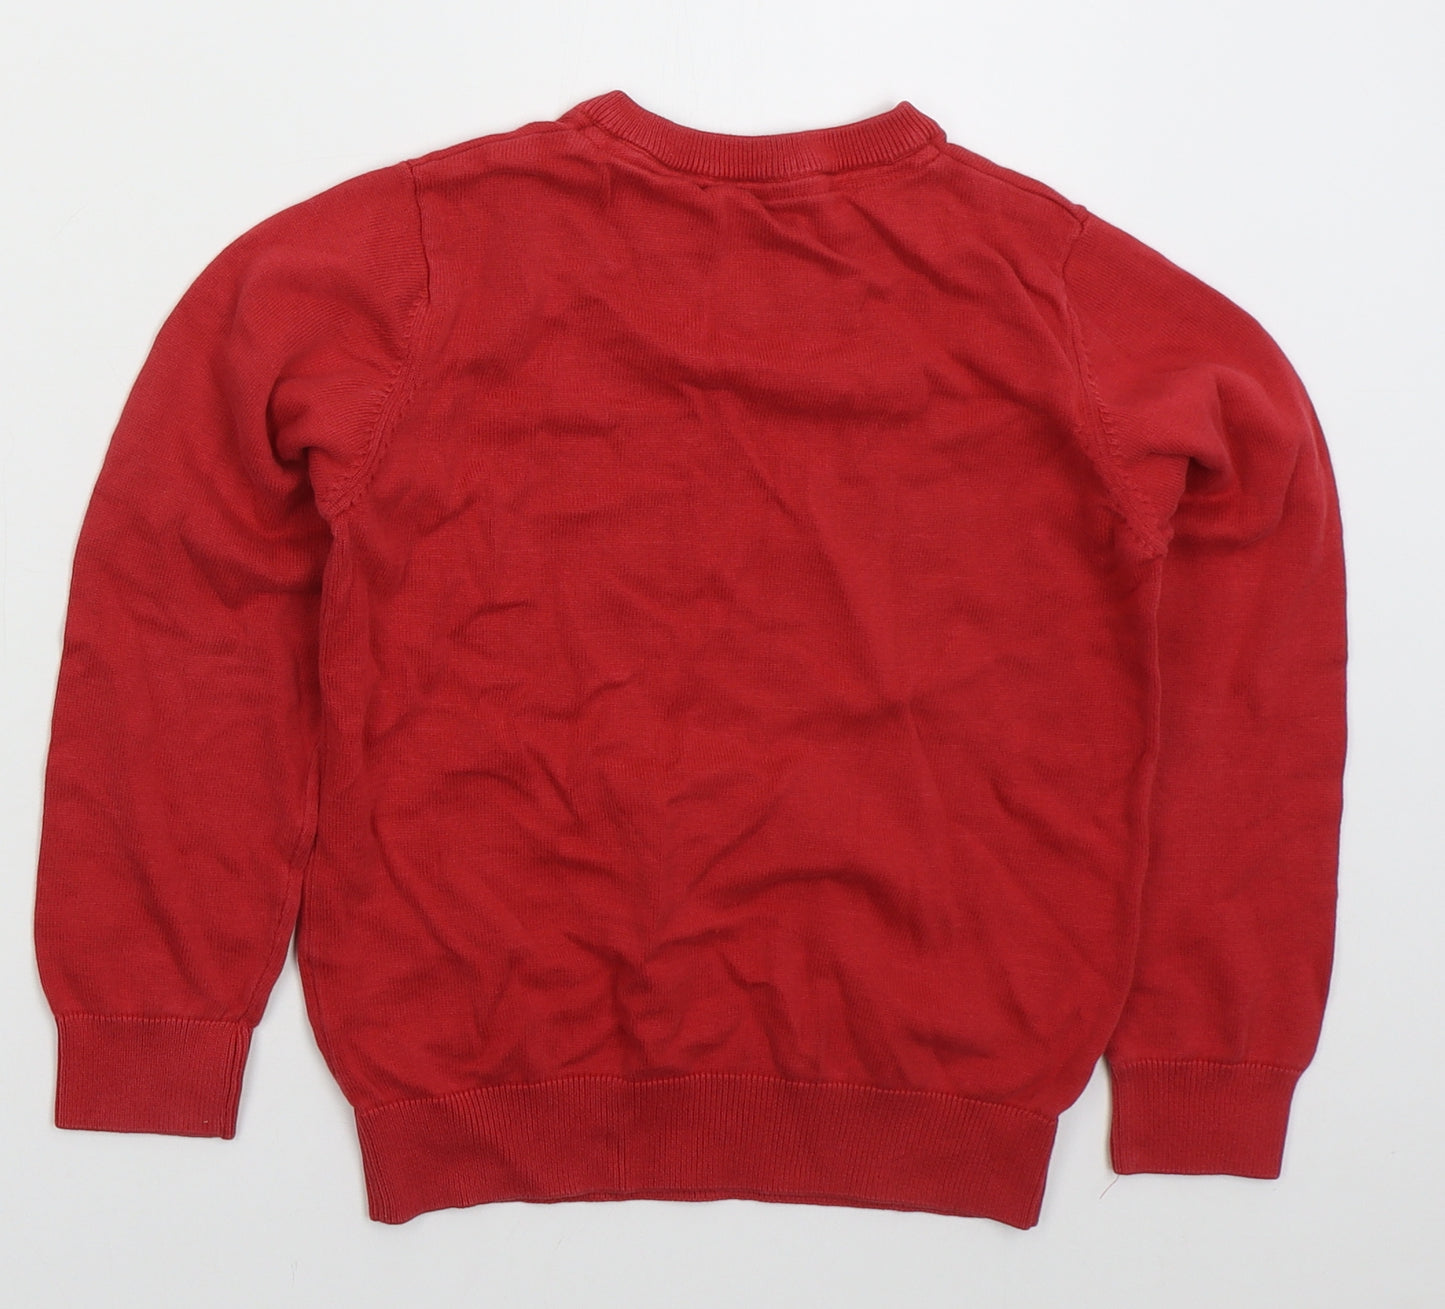 Marks and Spencer Boys Red V-Neck  Cotton Pullover Jumper Size 8-9 Years  Pullover